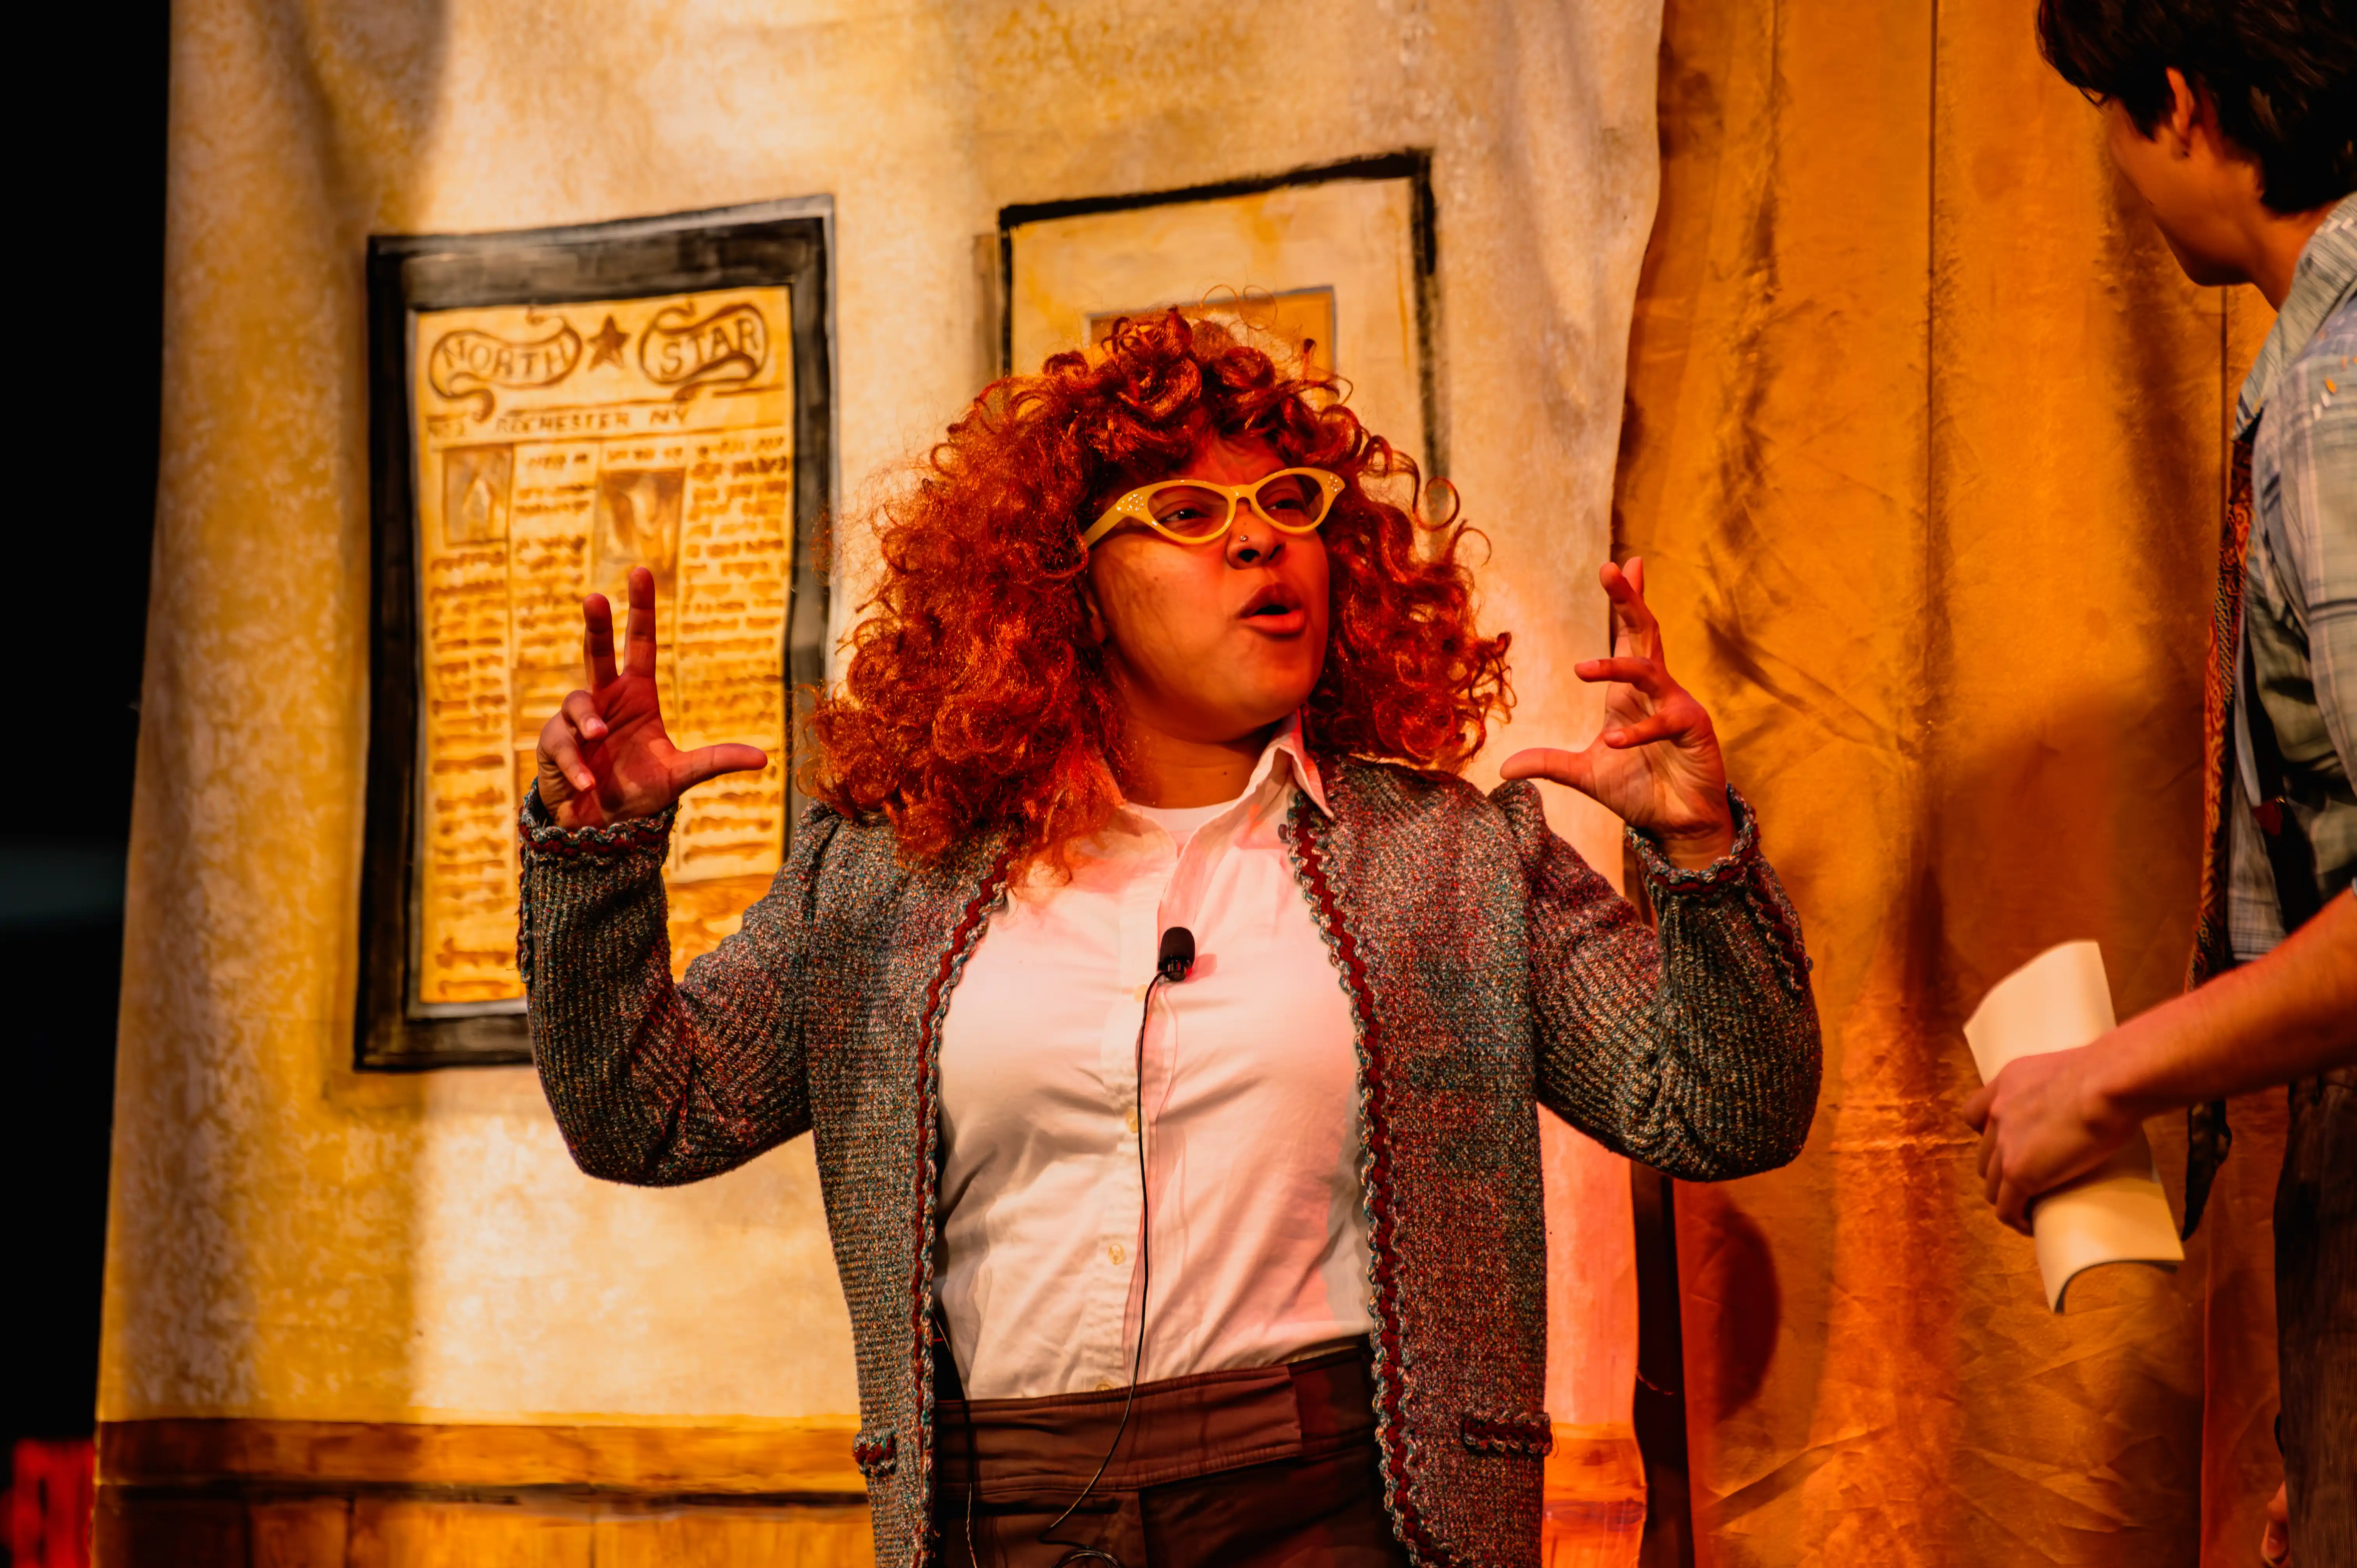 Actress in character wearing a curly red wig and retro clothing, gesturing dramatically on a warmly lit stage with framed pictures on the wall in the background.